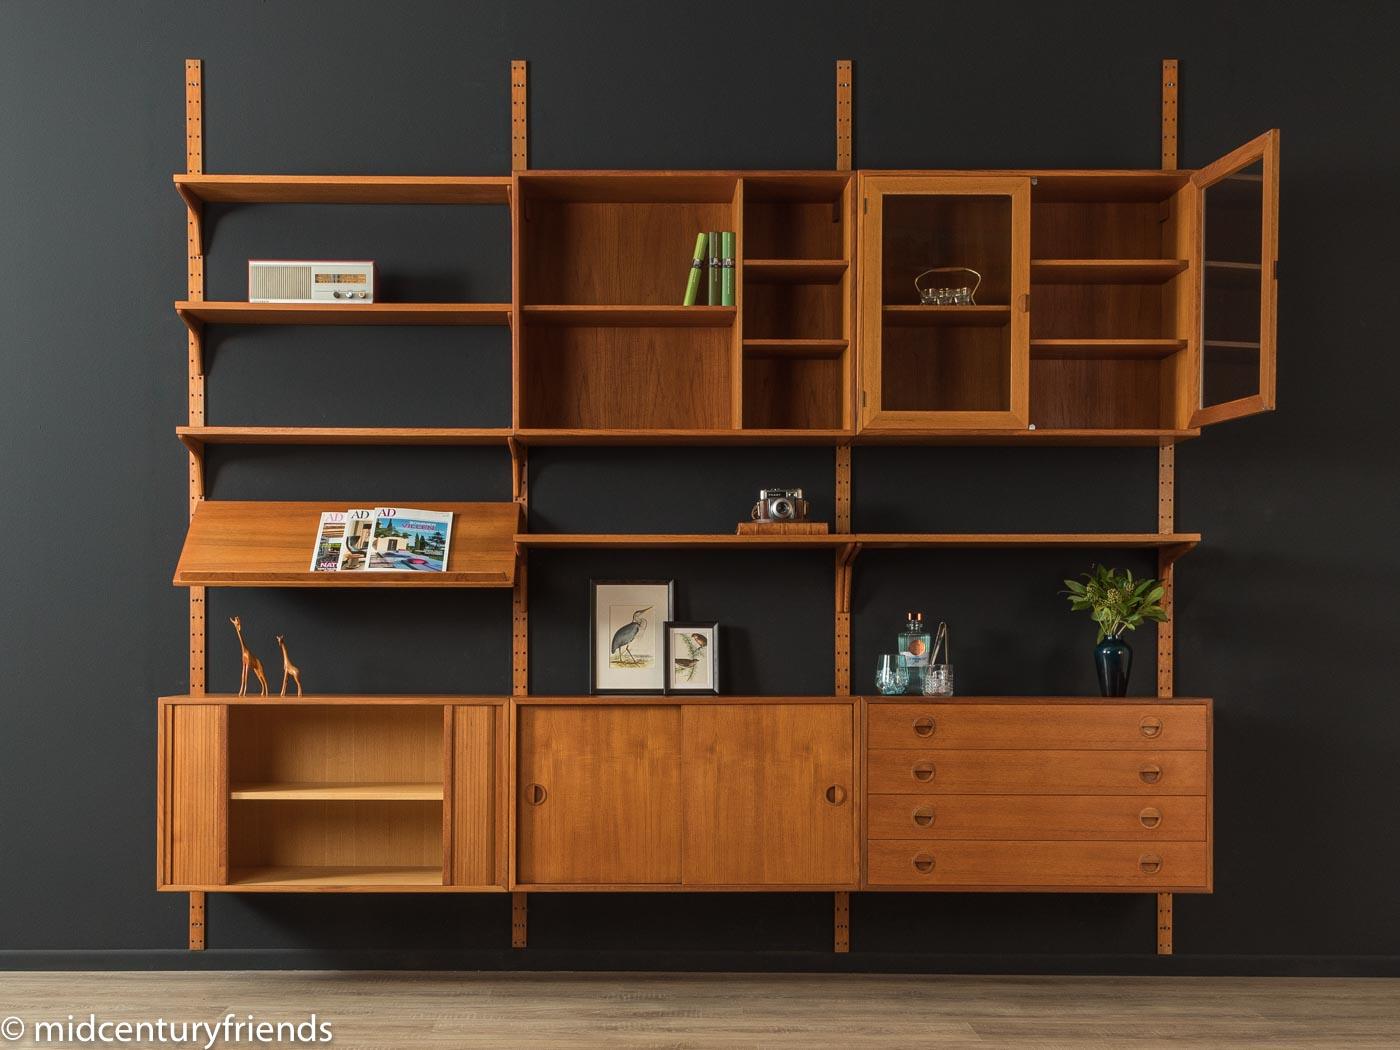 Classic shelving system from the 1960s by HG Furniture. The high-quality containers and shelves are veneered in teak. The system consists of five shelves, two containers with tambour doors, one container with glass doors, one container with drawers,